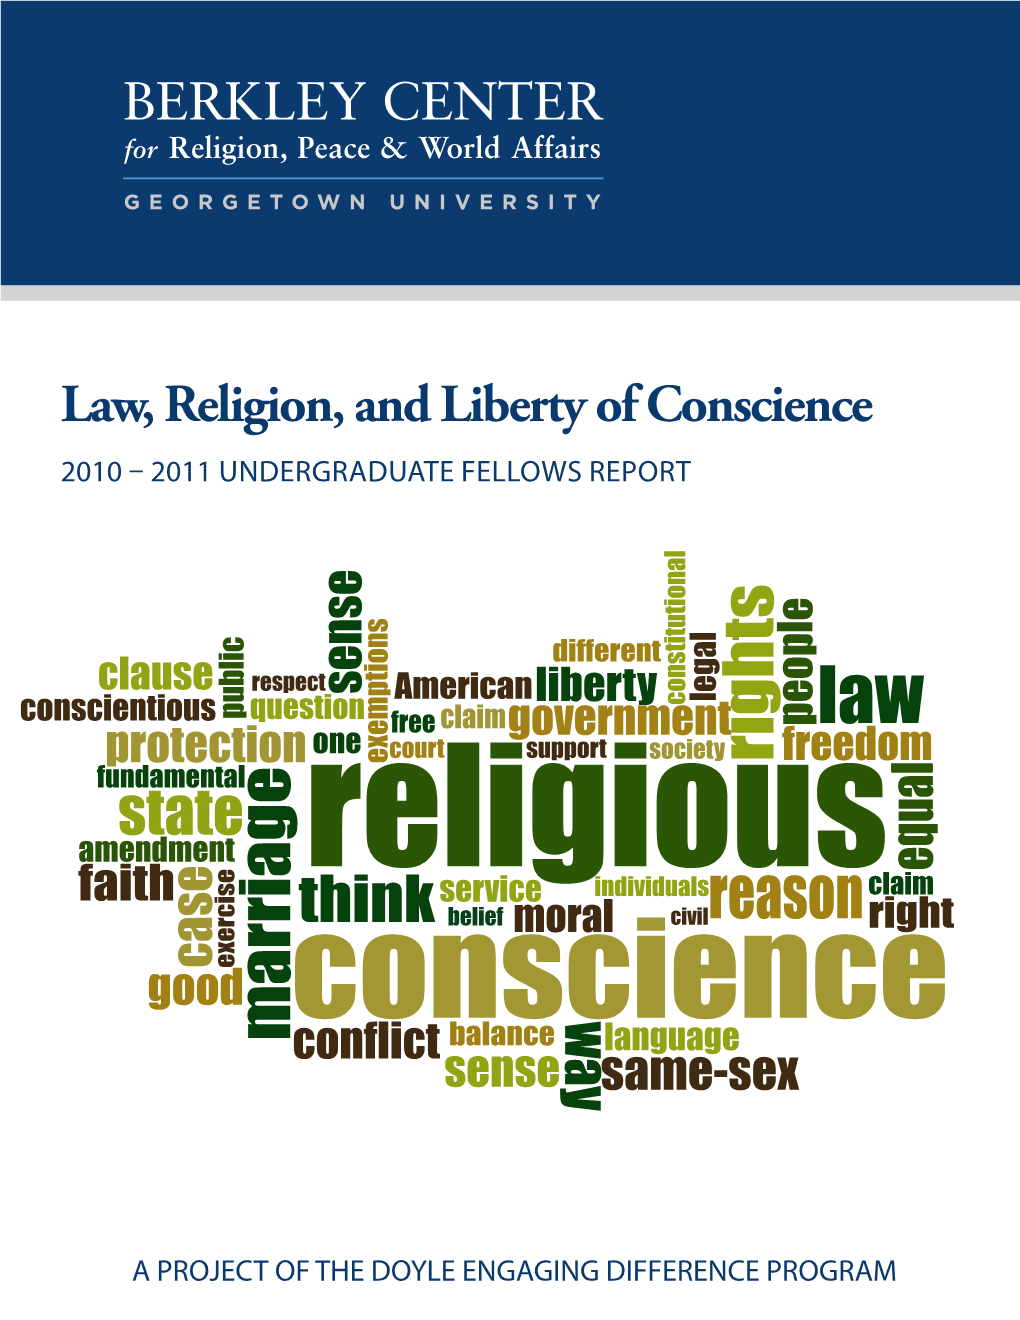 Law, Religion, and Liberty of Conscience 2010 – 2011 Undergraduate Fellows Report